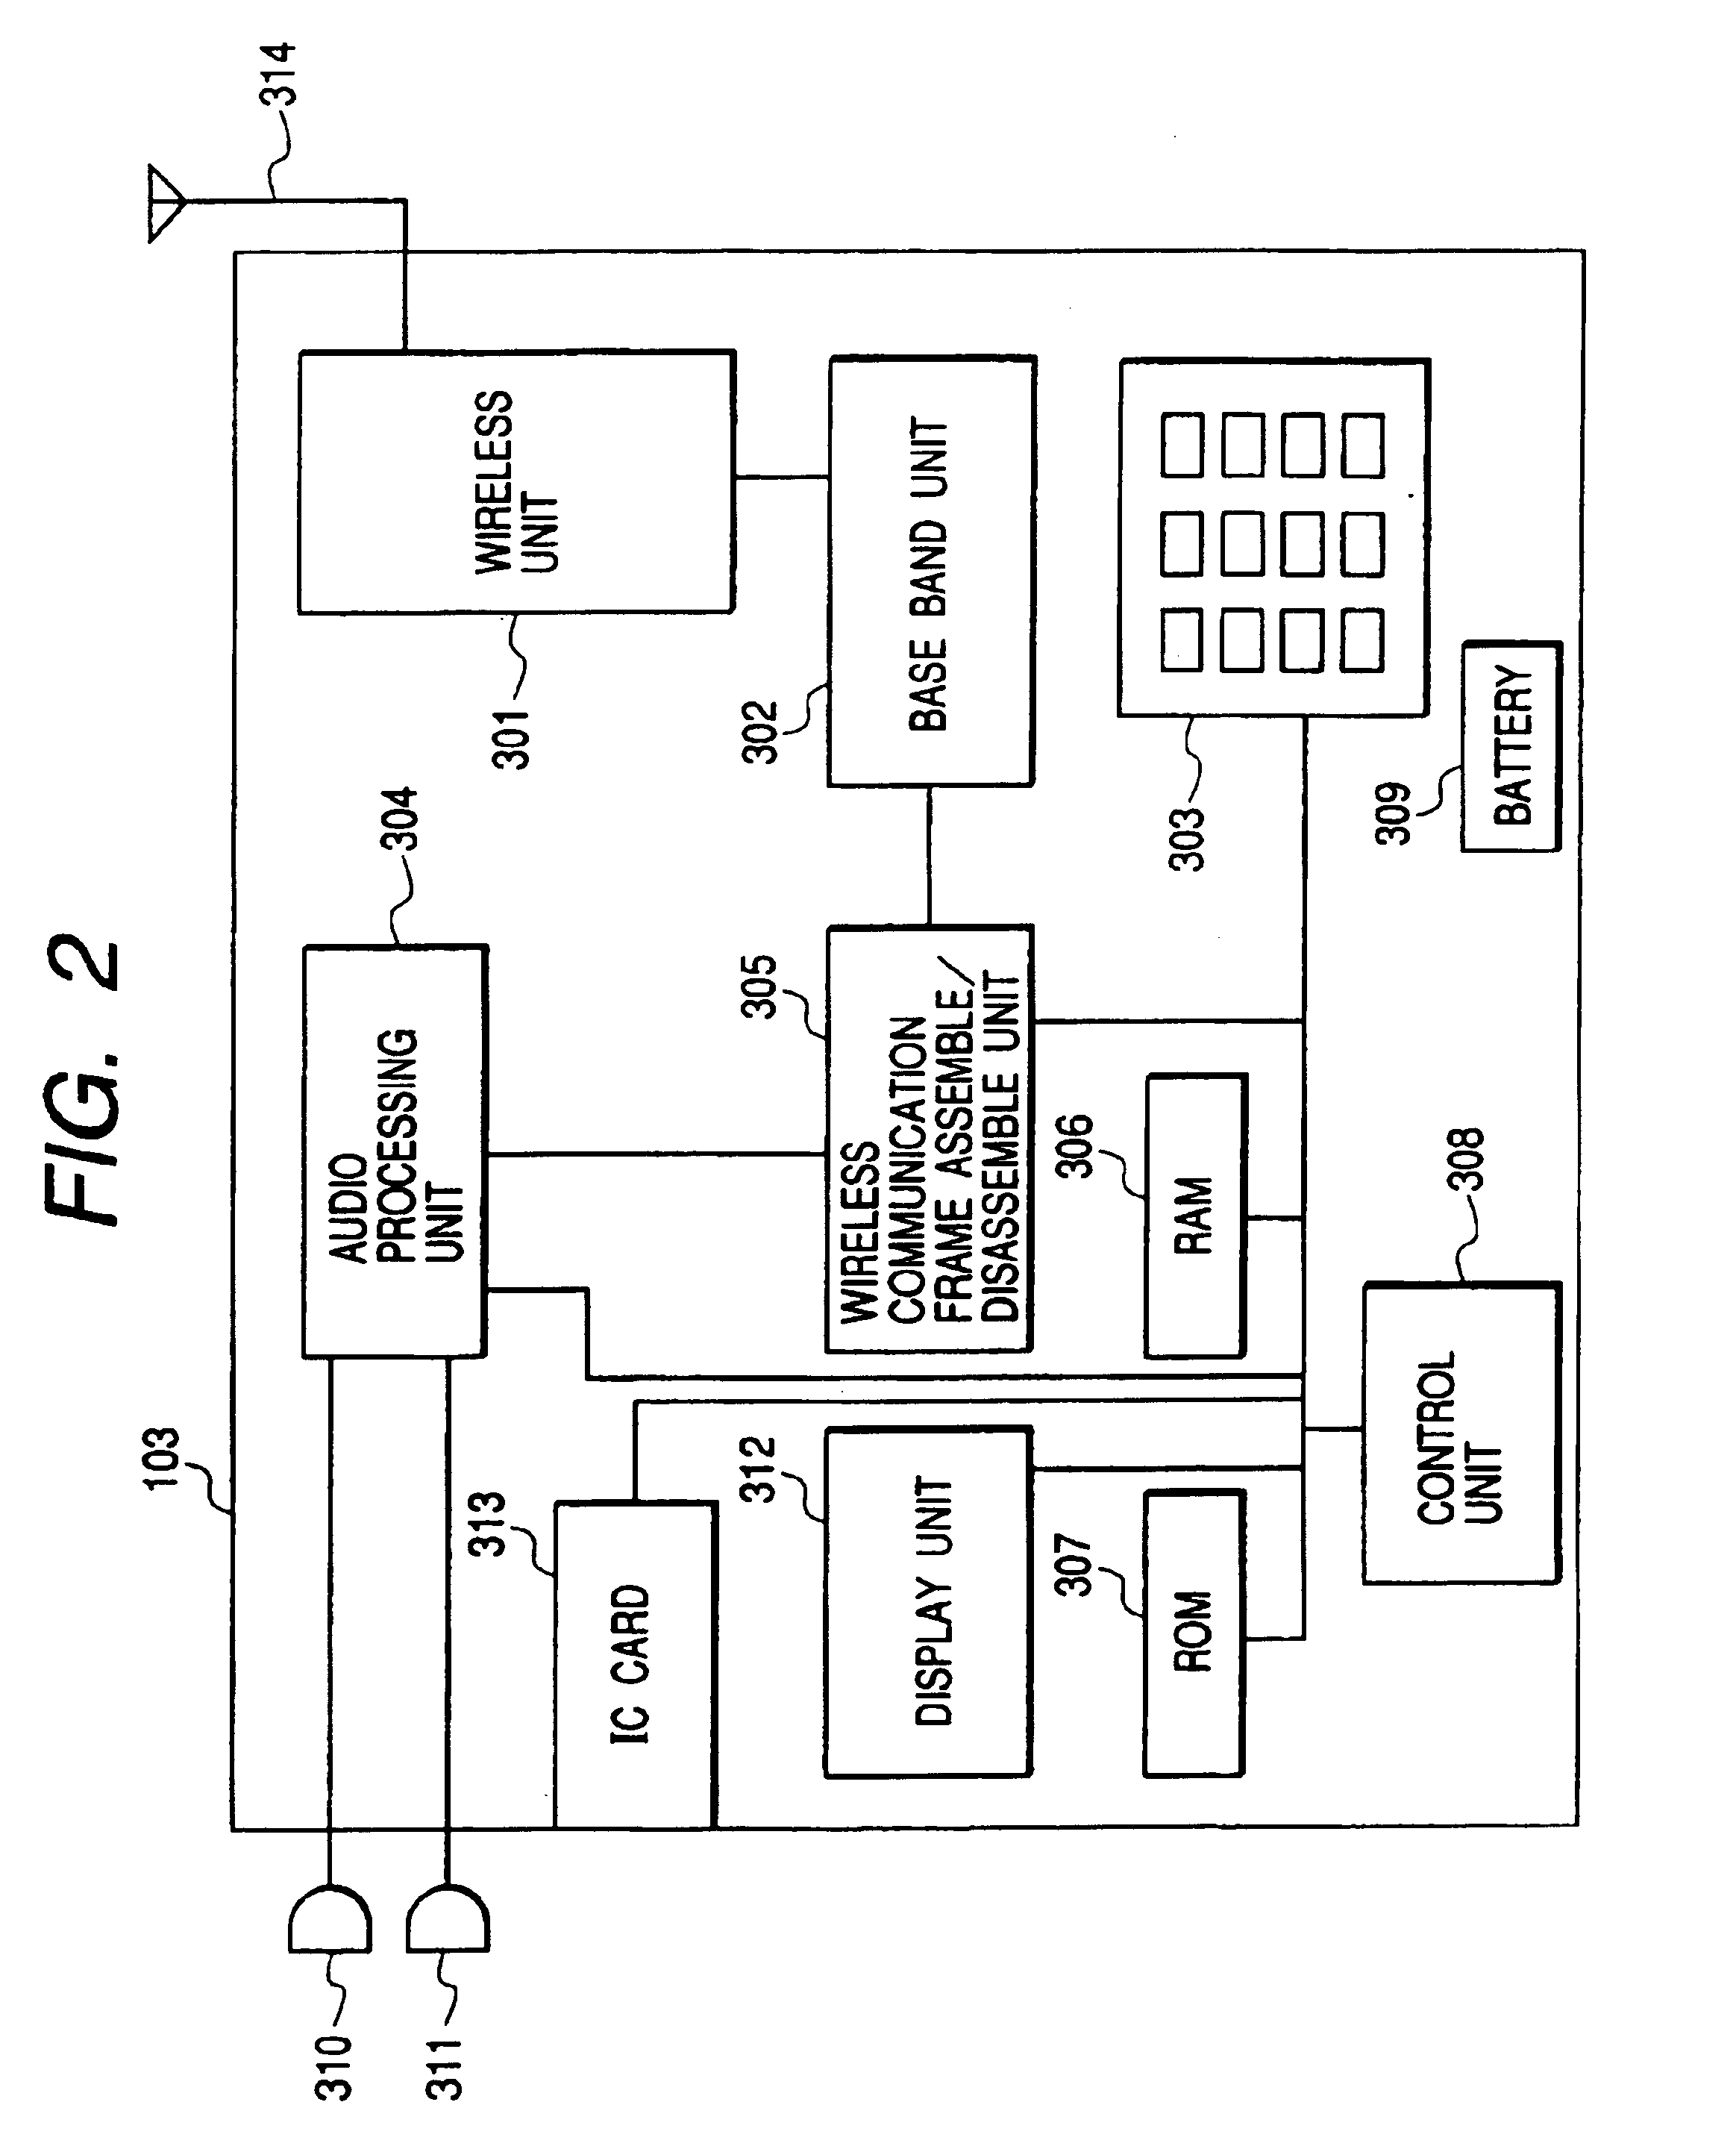 Wireless communication system capable of changing dynamically charge rate and wireless communication unit usable therewith